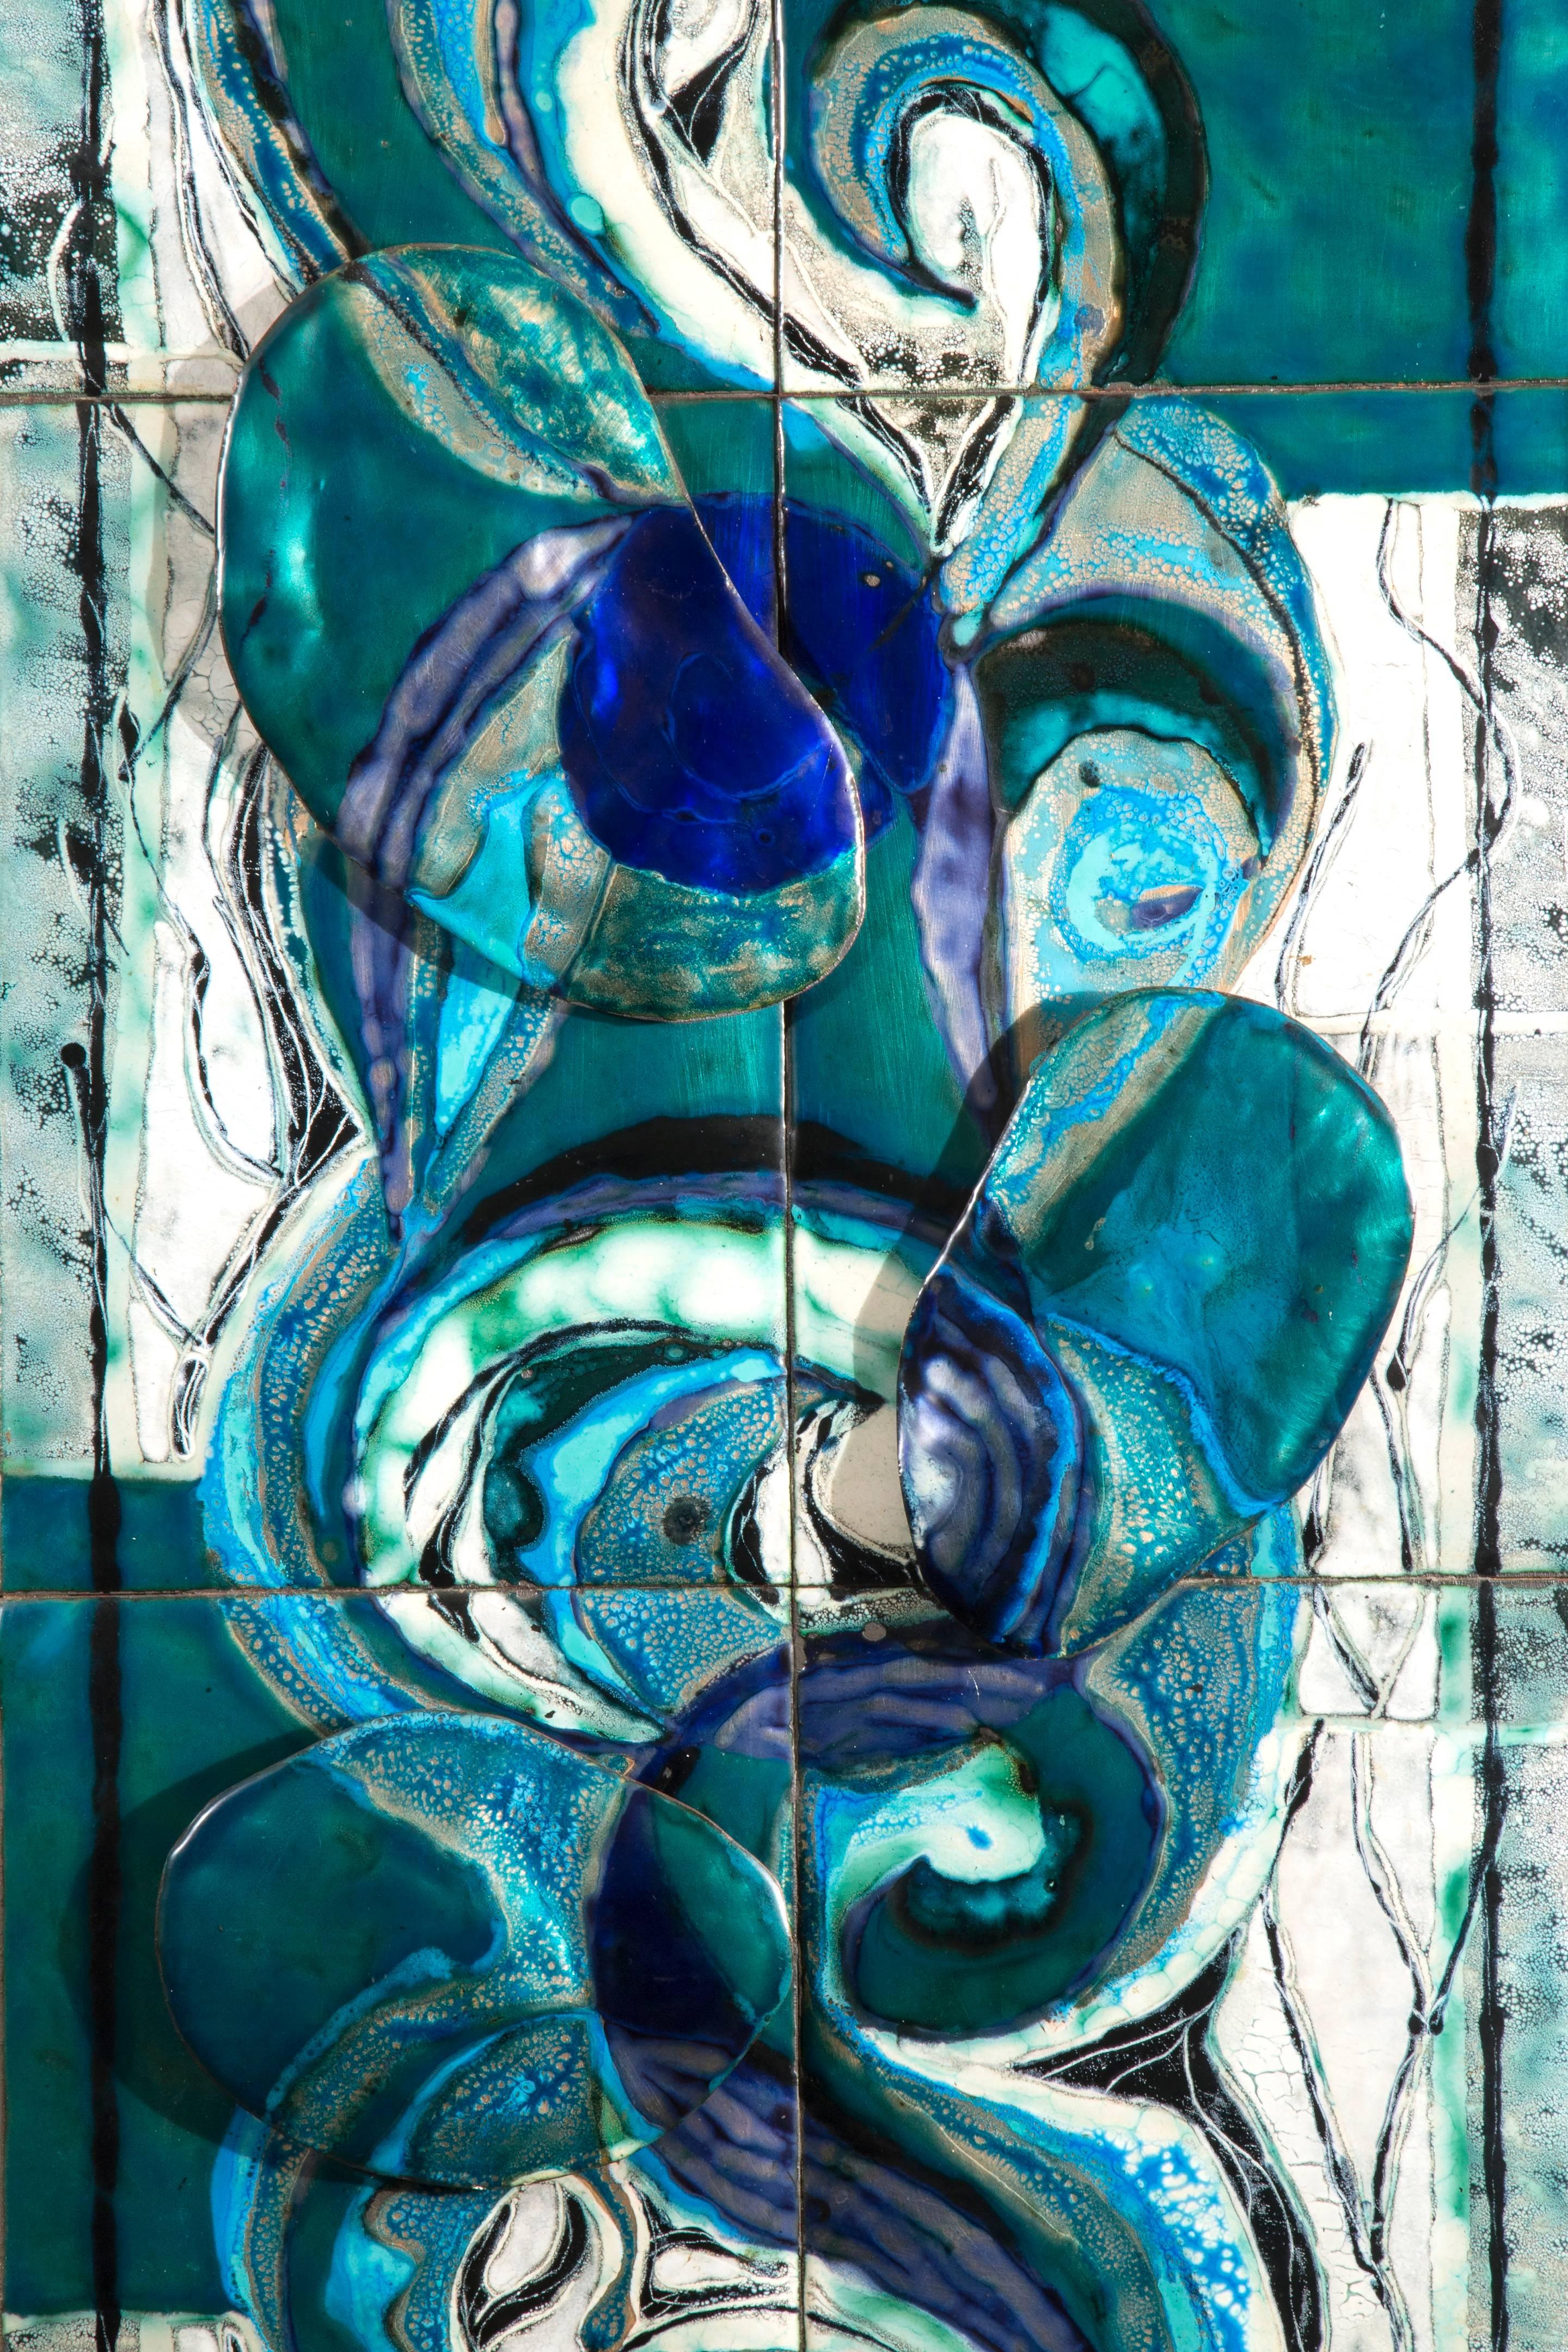 A rare large example of this intriguing artist's work. The swirling abstract form against a rectangular background within a steel frame. Signed Eje.